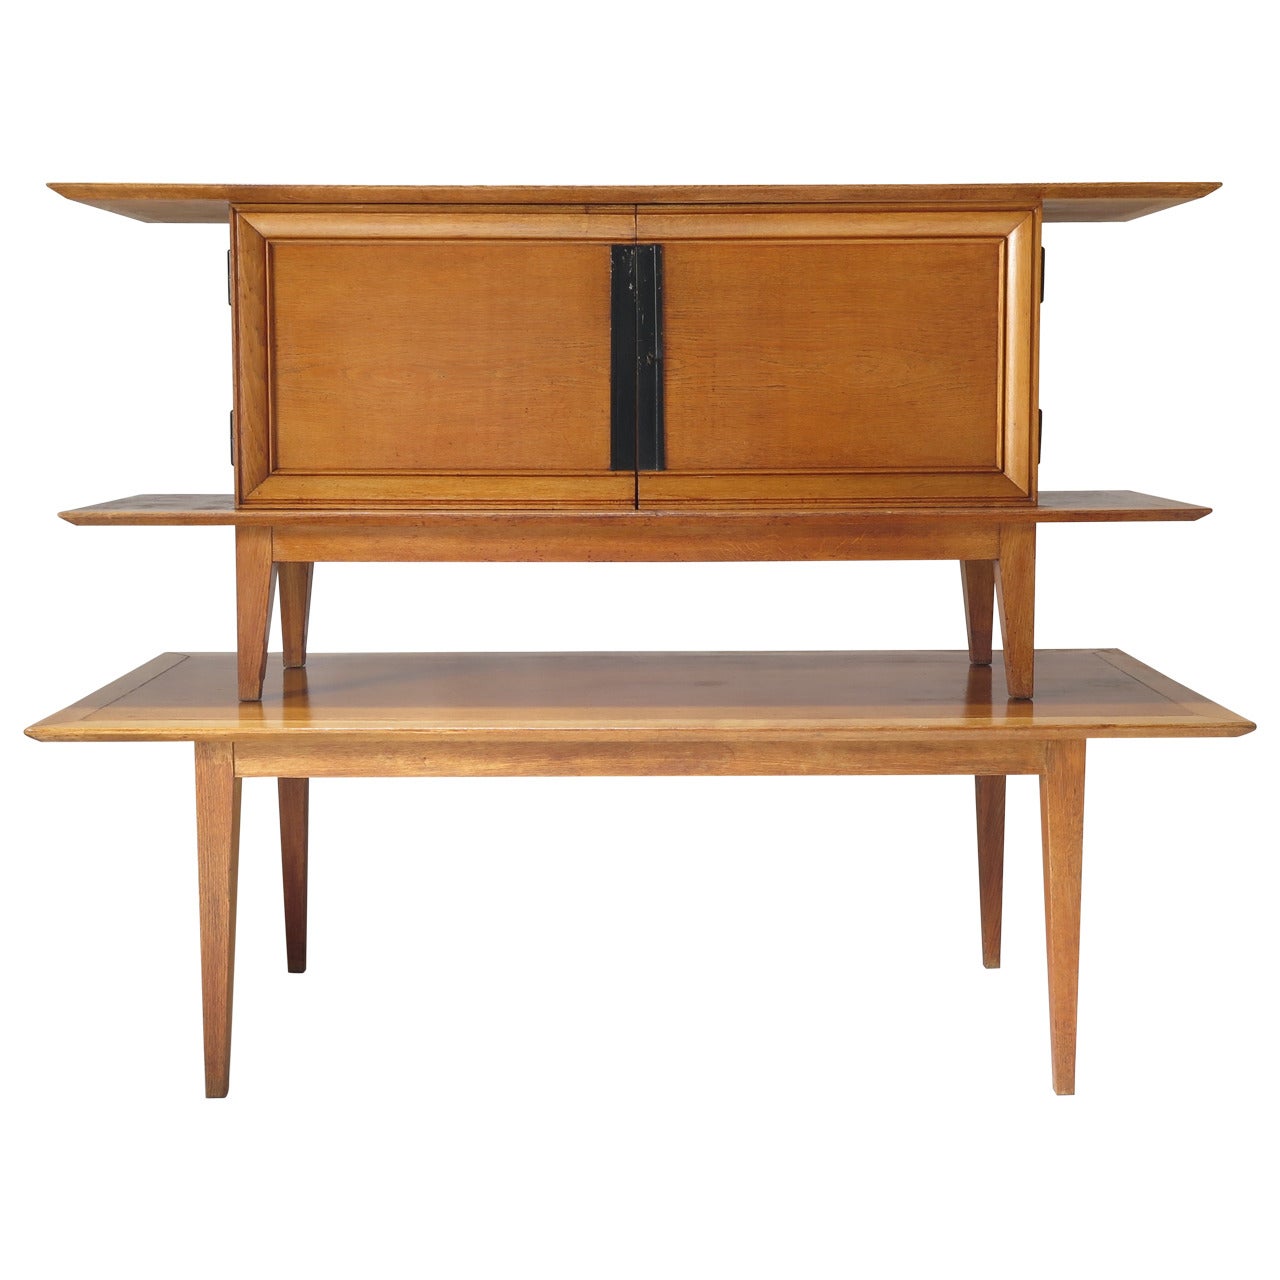 Japanese-Inspired Oak Credenza and Dining Table by Colette Gueden, France, 1950s